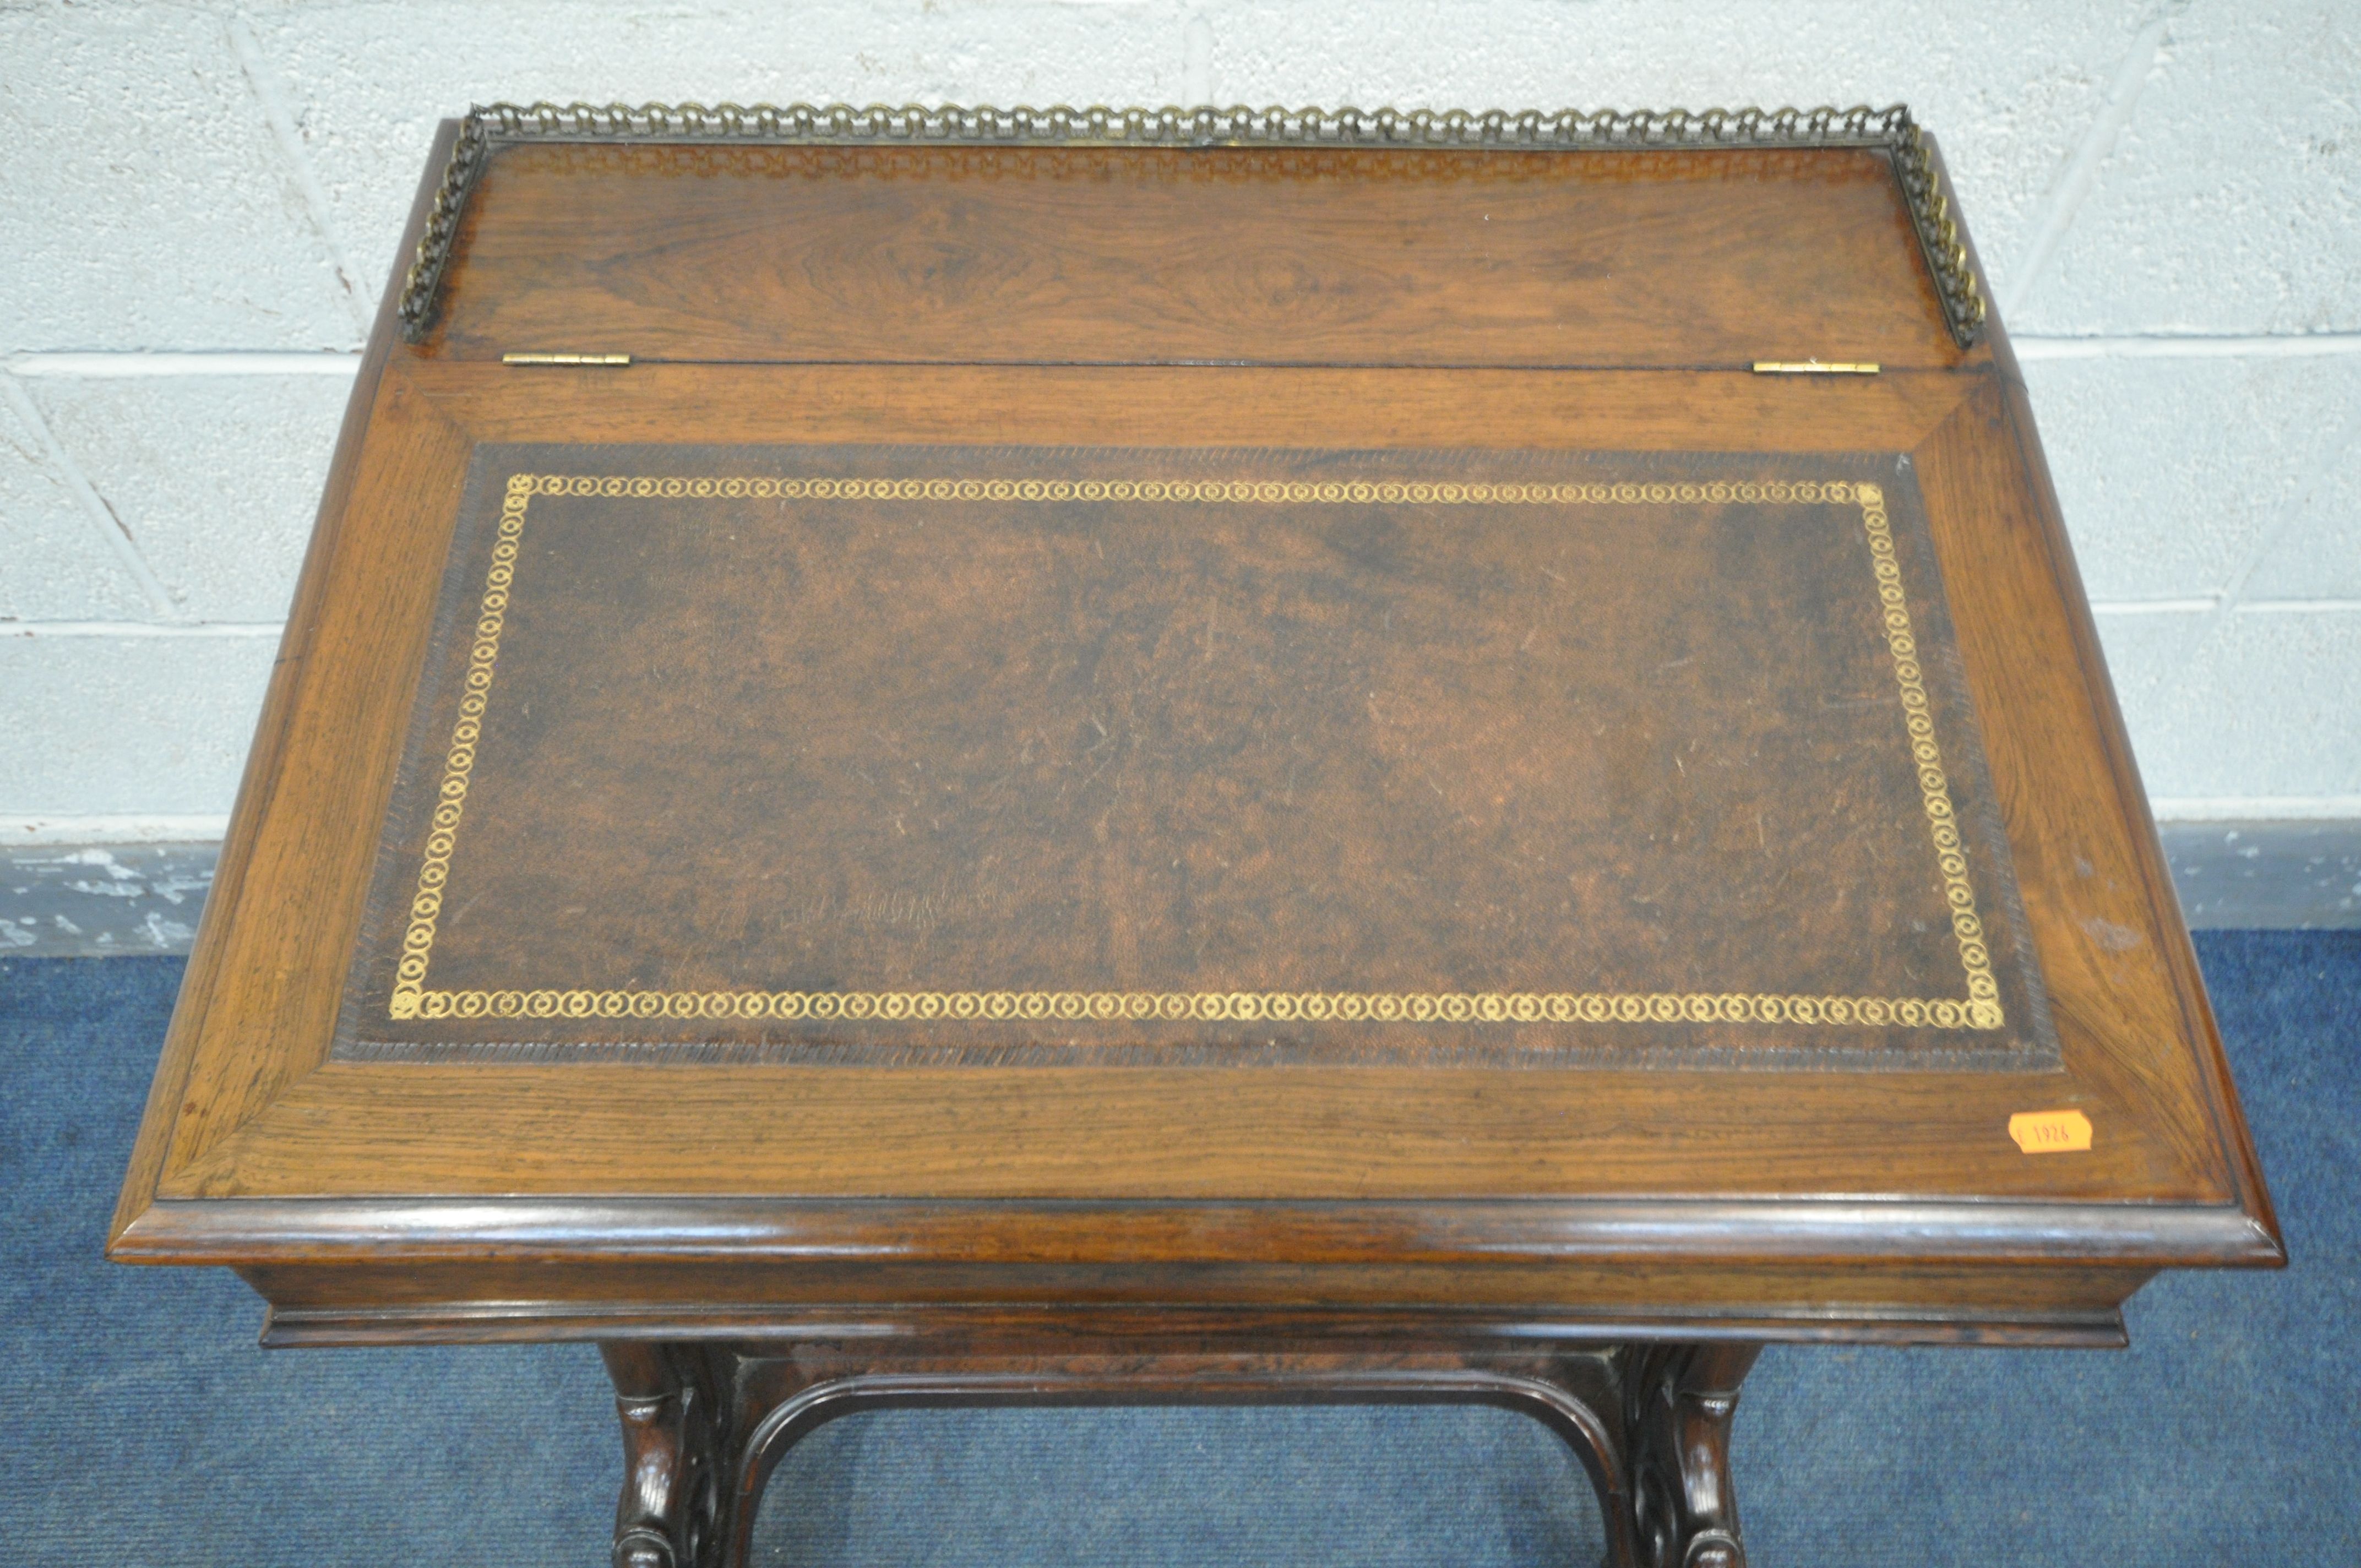 AN EARLY 19TH CENTURY ROSEWOOD DAVENPORT DESK, having a brass open fretwork gallery behind a leather - Image 4 of 9